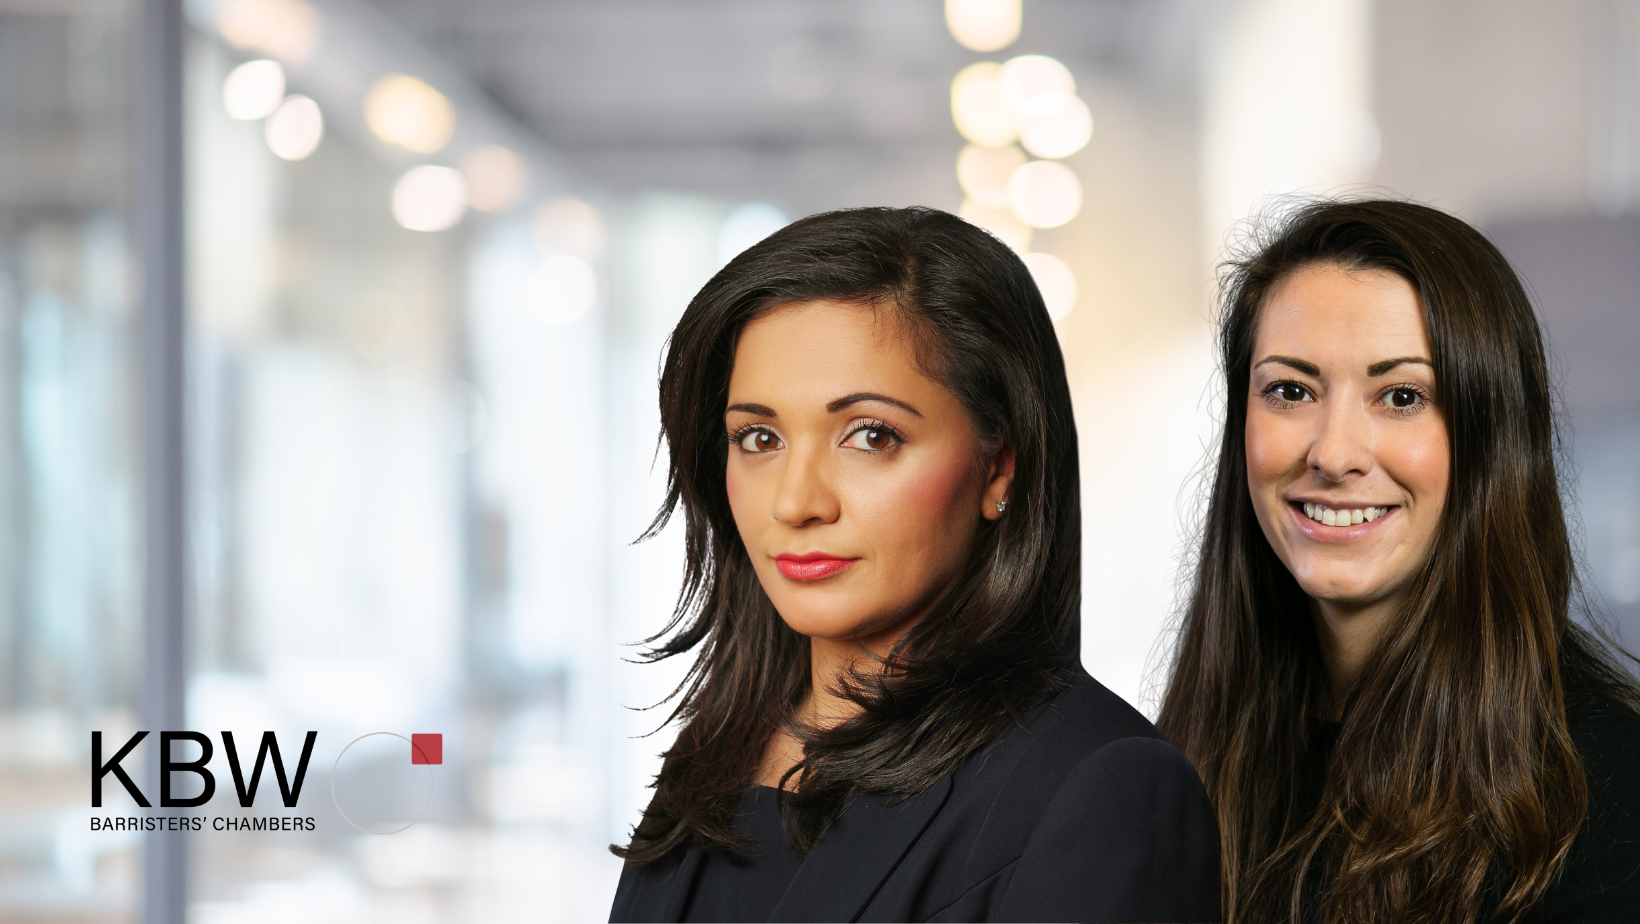 Manisha Marwaha and Lorena Veale appear in the High Court Family Division in an application to notify wider family members, in two different countries, of a relinquished child.